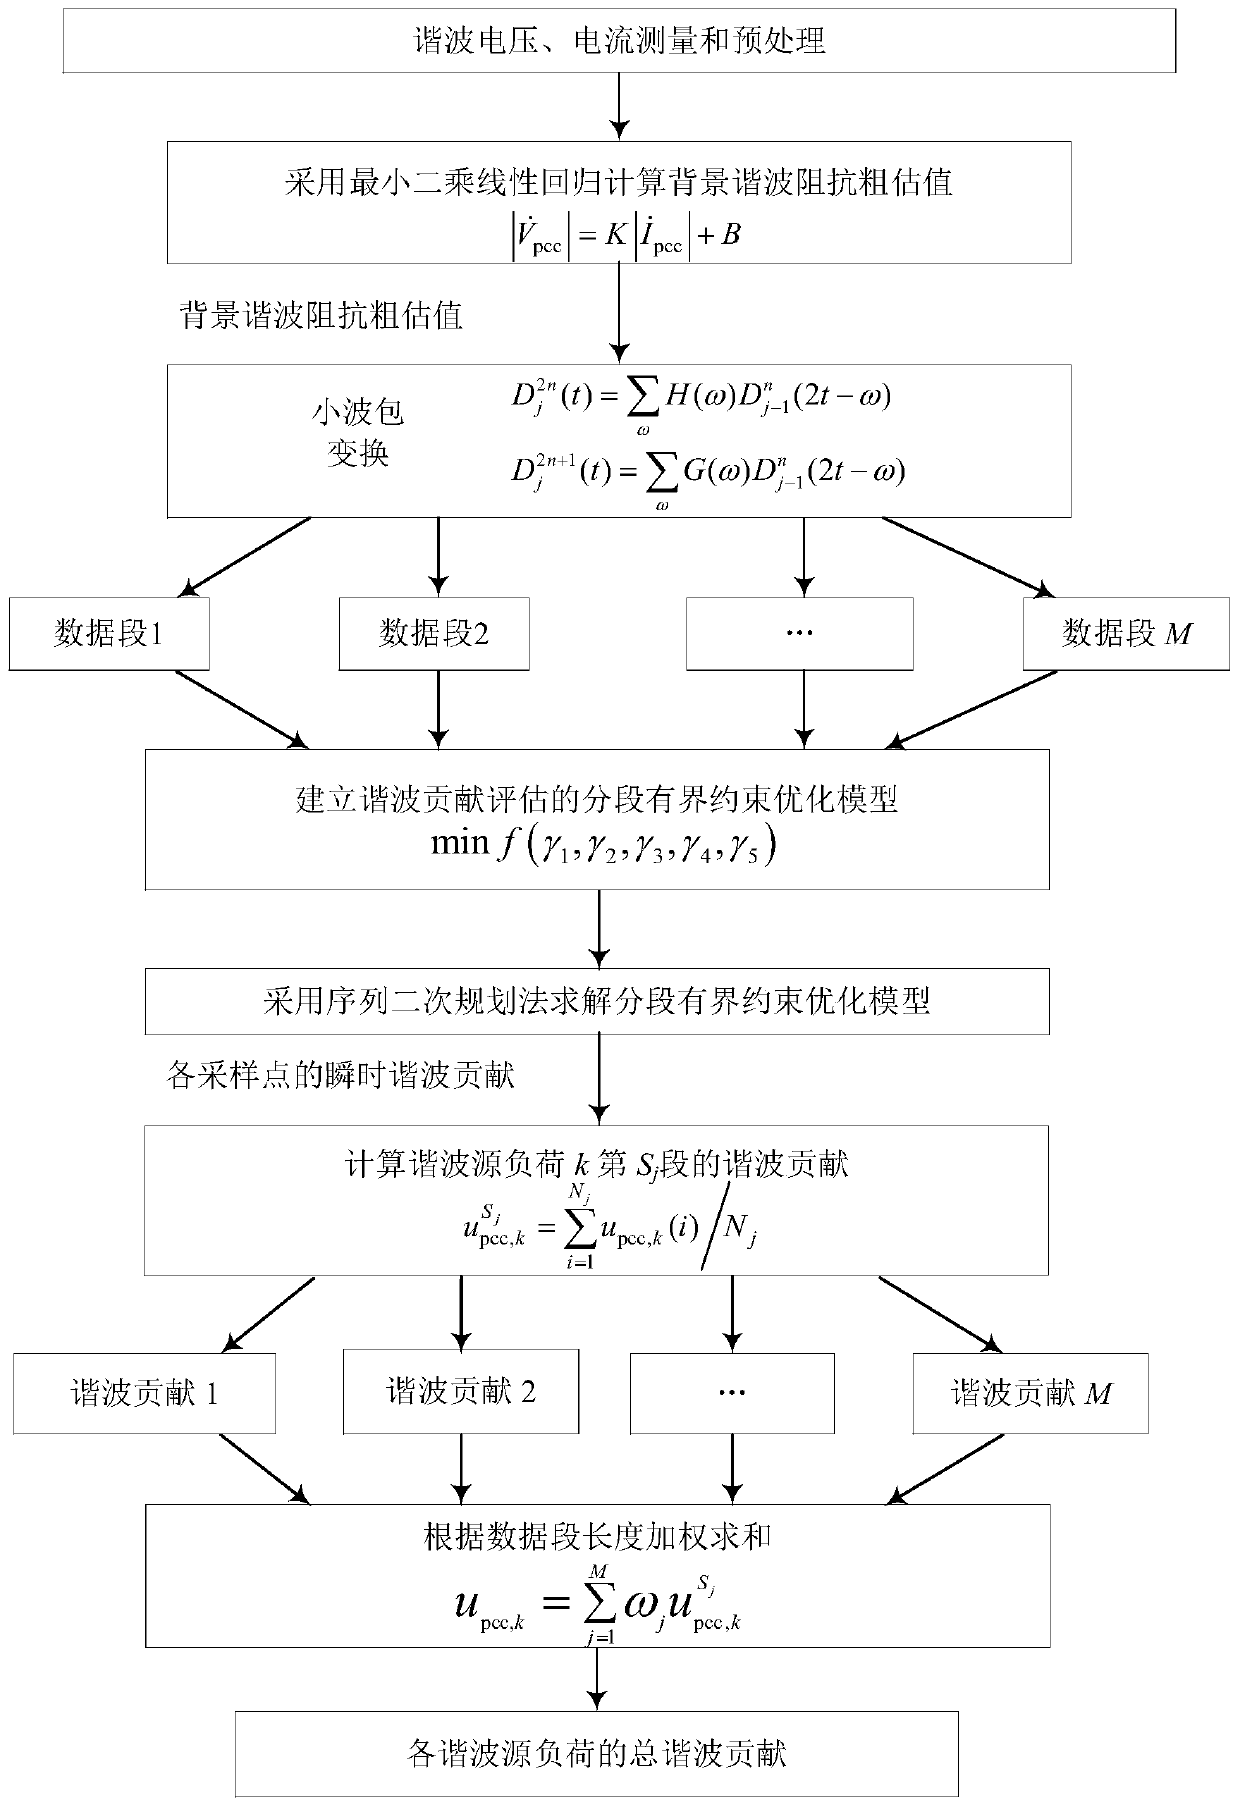 A Piecewise Bounded Constrained Optimization Method for Evaluation of Load Harmonic Contribution in Distribution Network